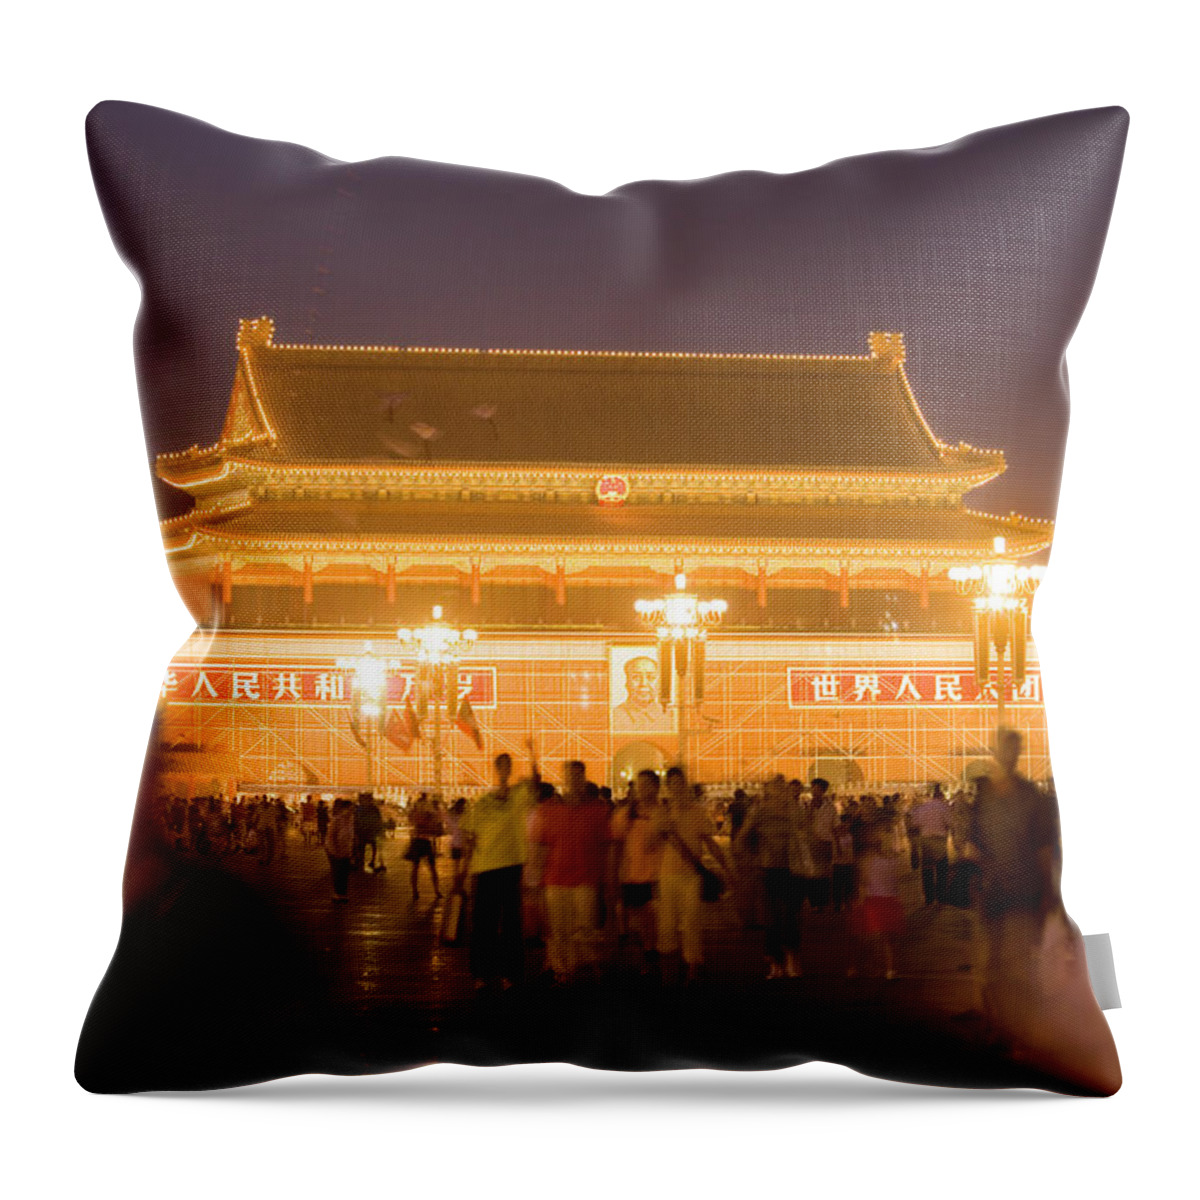 Chinese Culture Throw Pillow featuring the photograph Gate Of Heavenly Peace Under Renovation by Lonely Planet